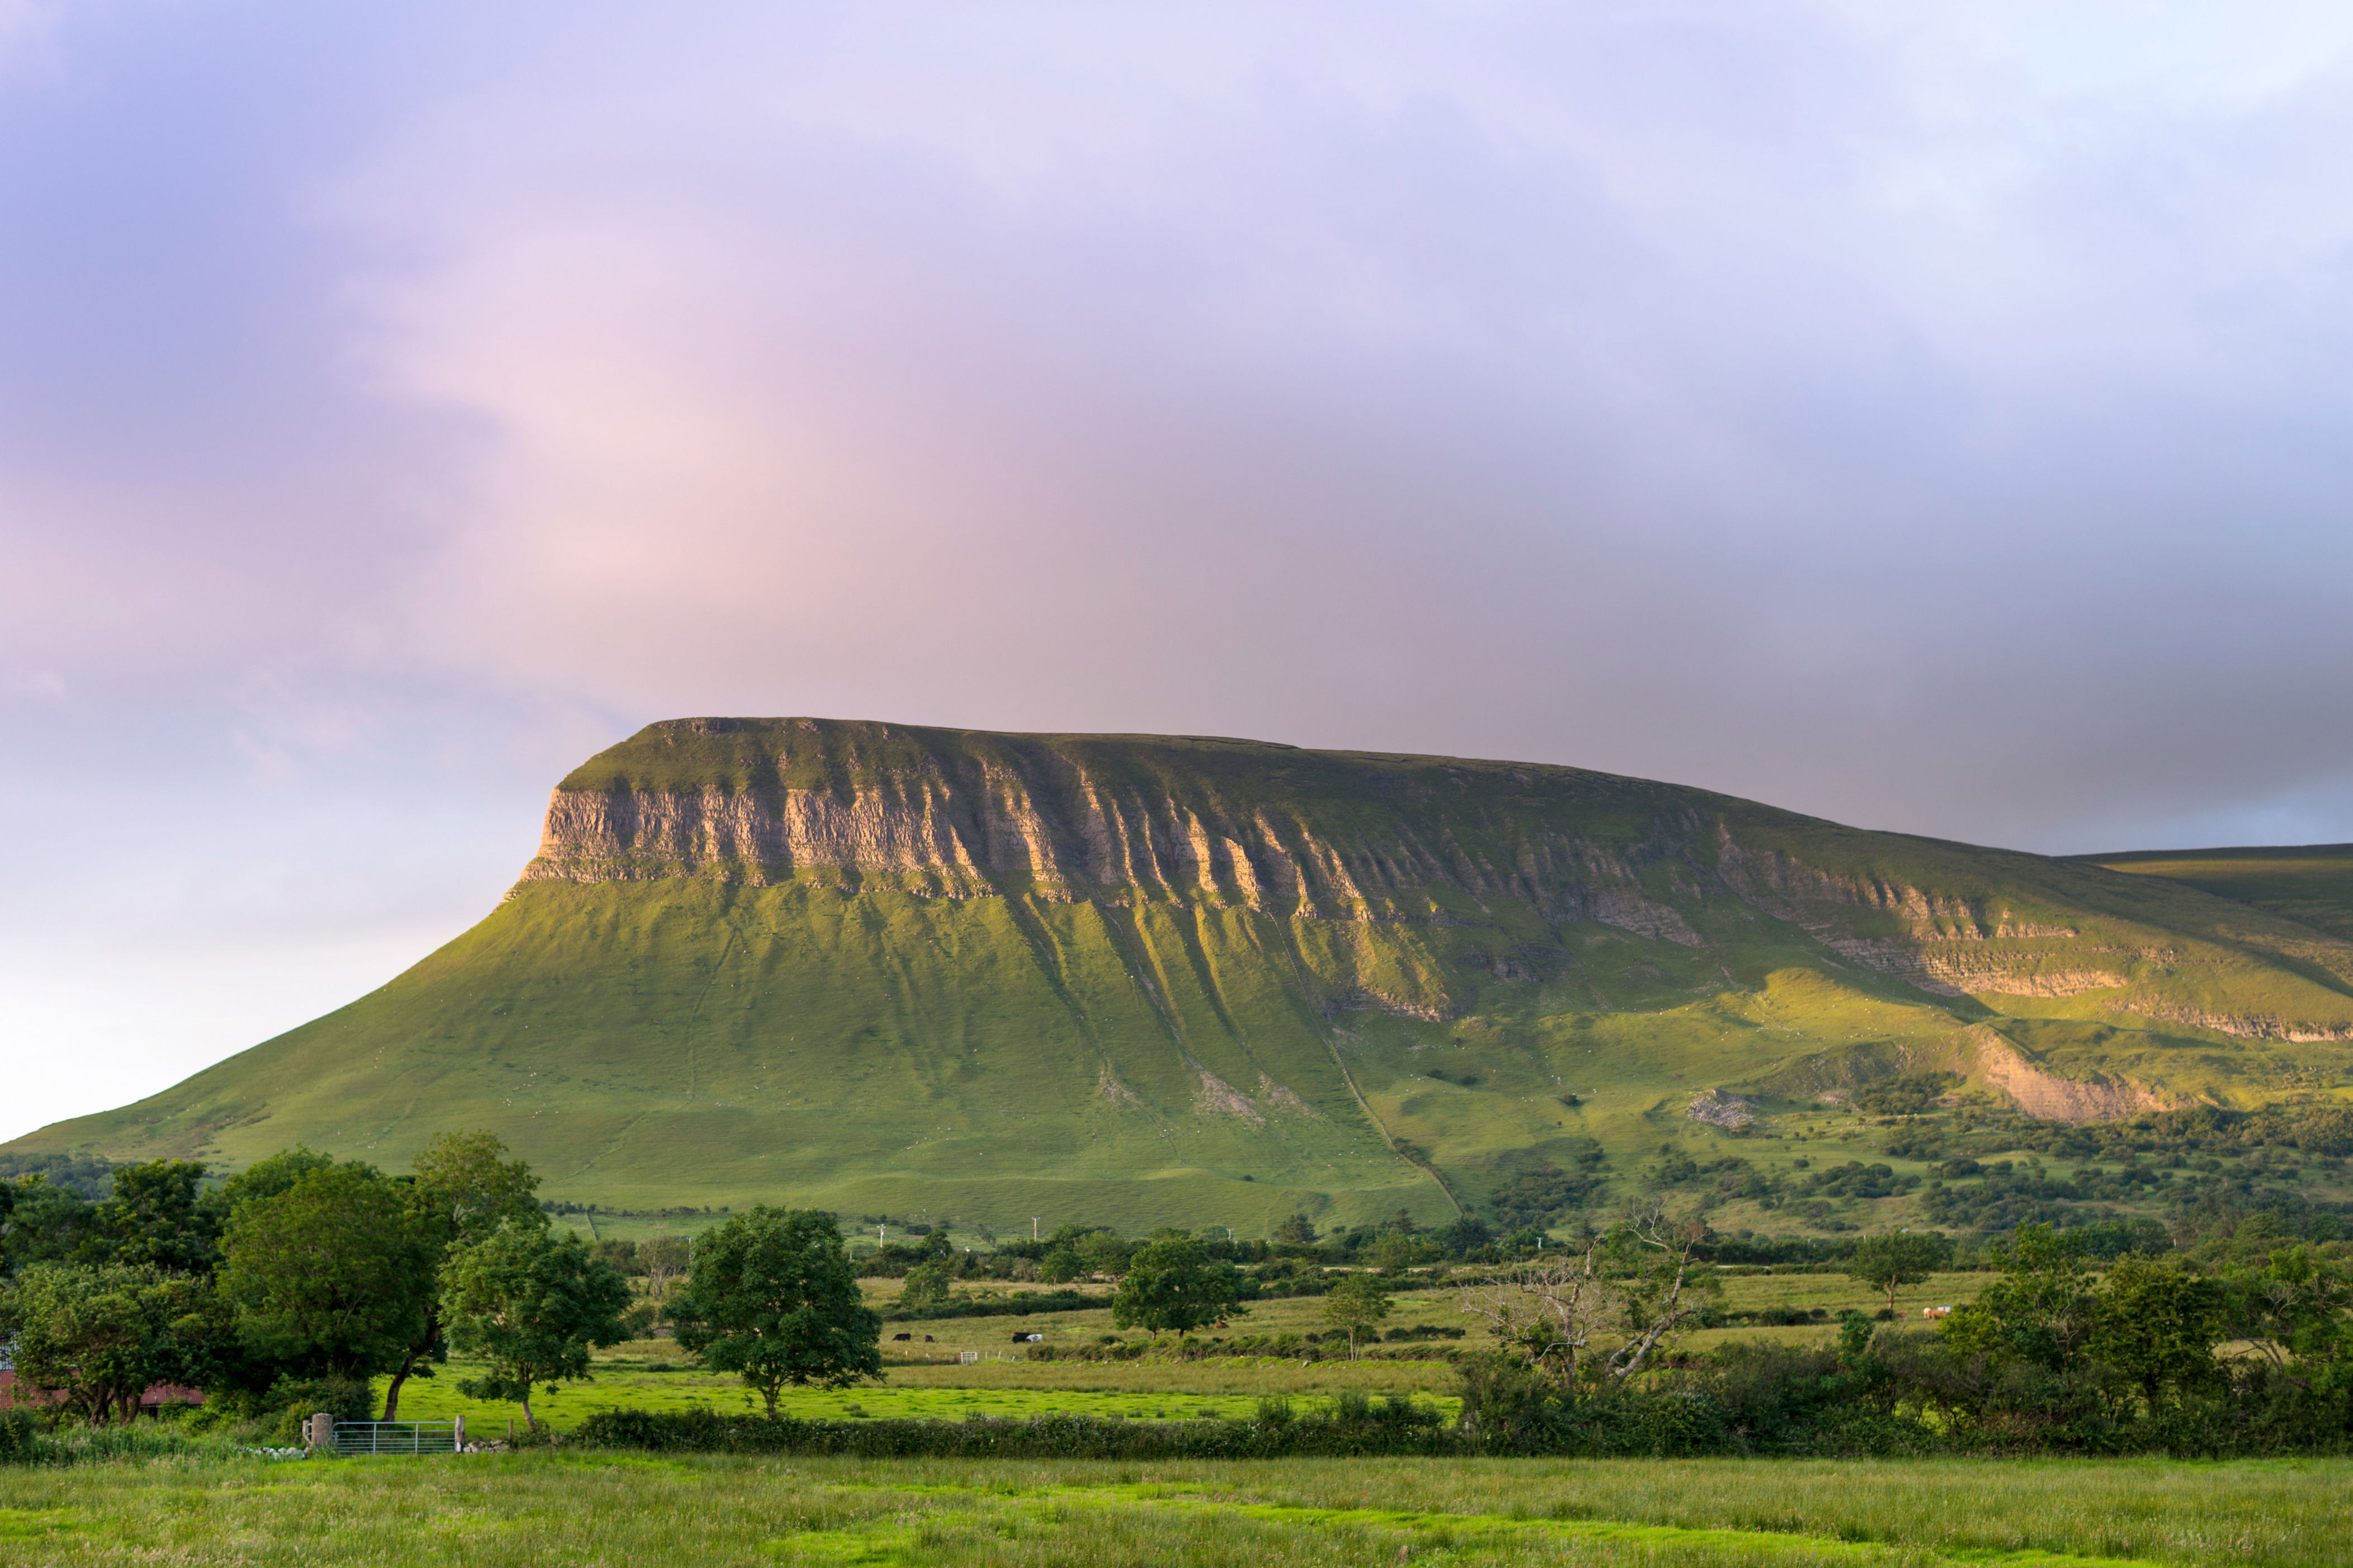 <p><strong>Location:</strong> County Sligo</p> <p>Formed hundreds of millions of years ago, this limestone formation hovers over Sligo like something from a <a href="https://www.cntraveler.com/story/books-to-read-this-summer?mbid=synd_msn_rss&utm_source=msn&utm_medium=syndication">fantasy novel</a>. Benbulben’s paved trails make it a popular destination for hikers and climbers, but the peak is perhaps best known for its literary associations. Irish poet W. B. Yeats drew inspiration from the mountain and its surrounding landscapes, most notably in his 1938 poem “Under Ben Bulben.”</p><p>Sign up to receive the latest news, expert tips, and inspiration on all things travel</p><a href="https://www.cntraveler.com/newsletter/the-daily?sourceCode=msnsend">Inspire Me</a>